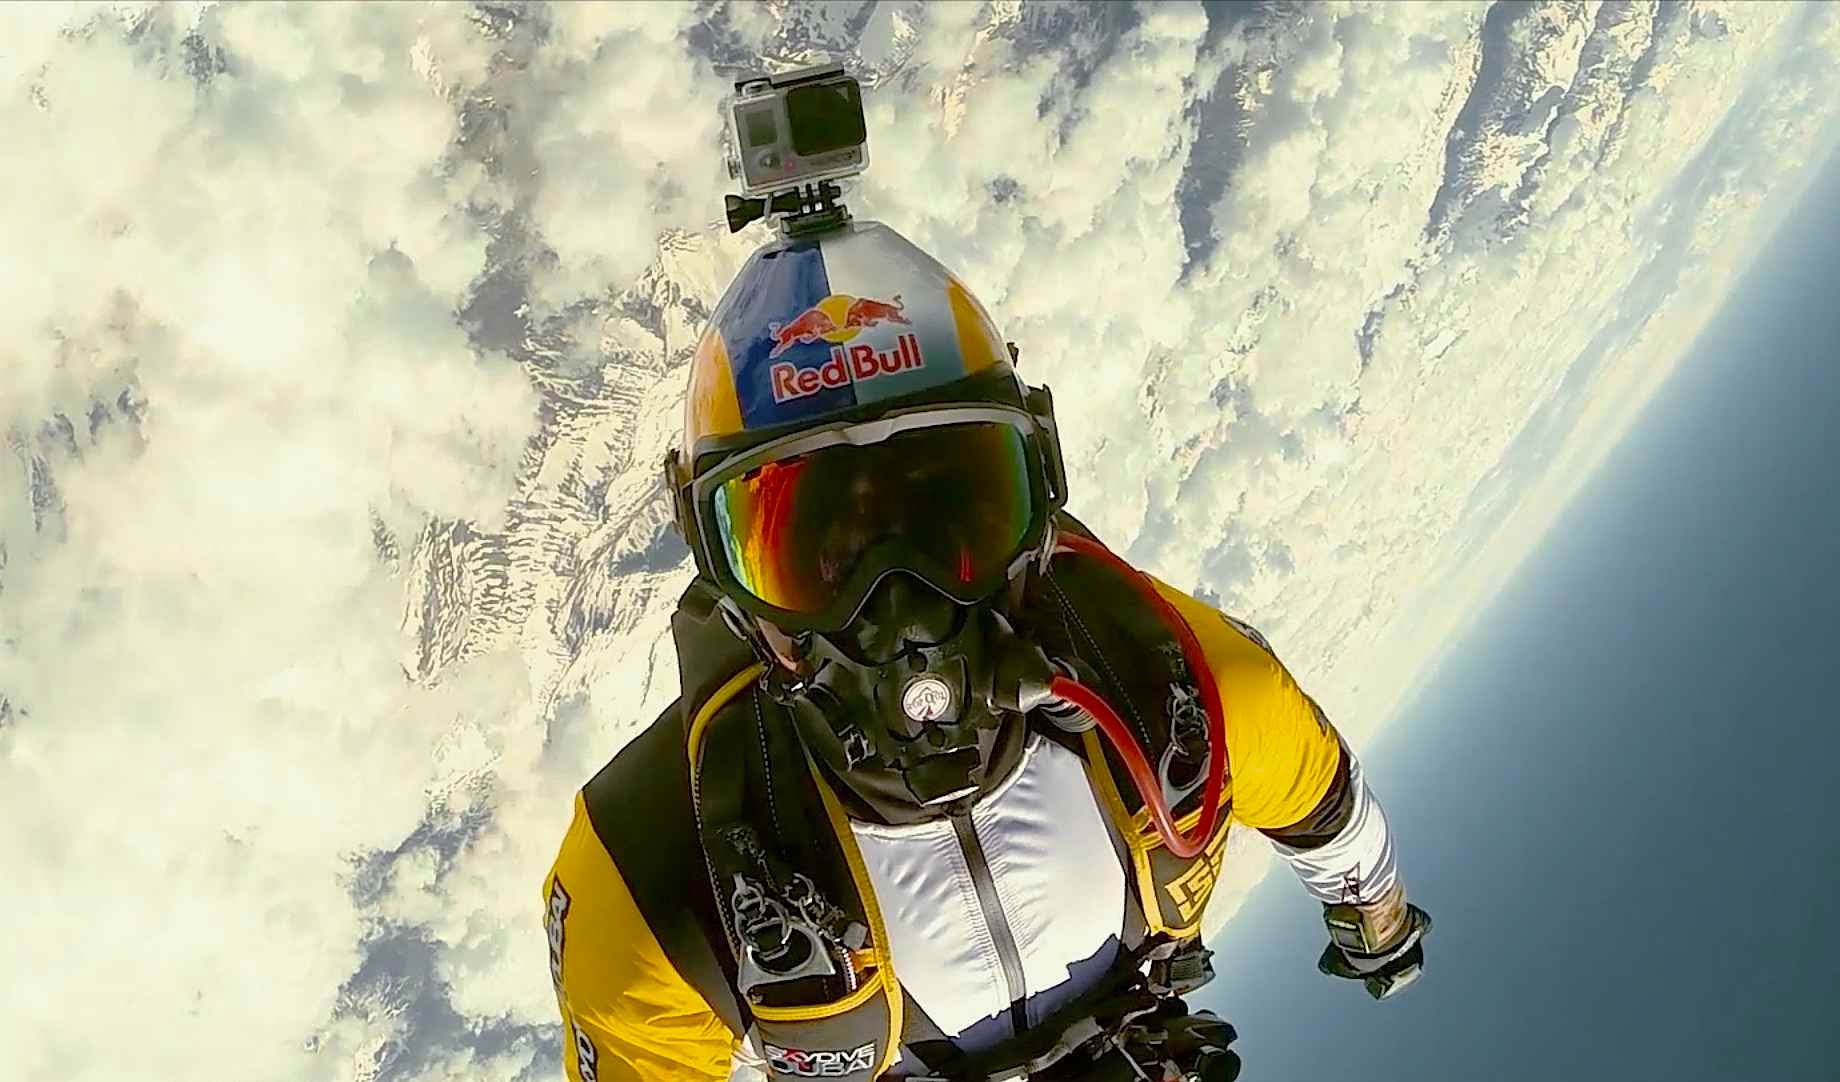 Breathtaking high altitude acrobatic skydiving – Red Bull Skycombo